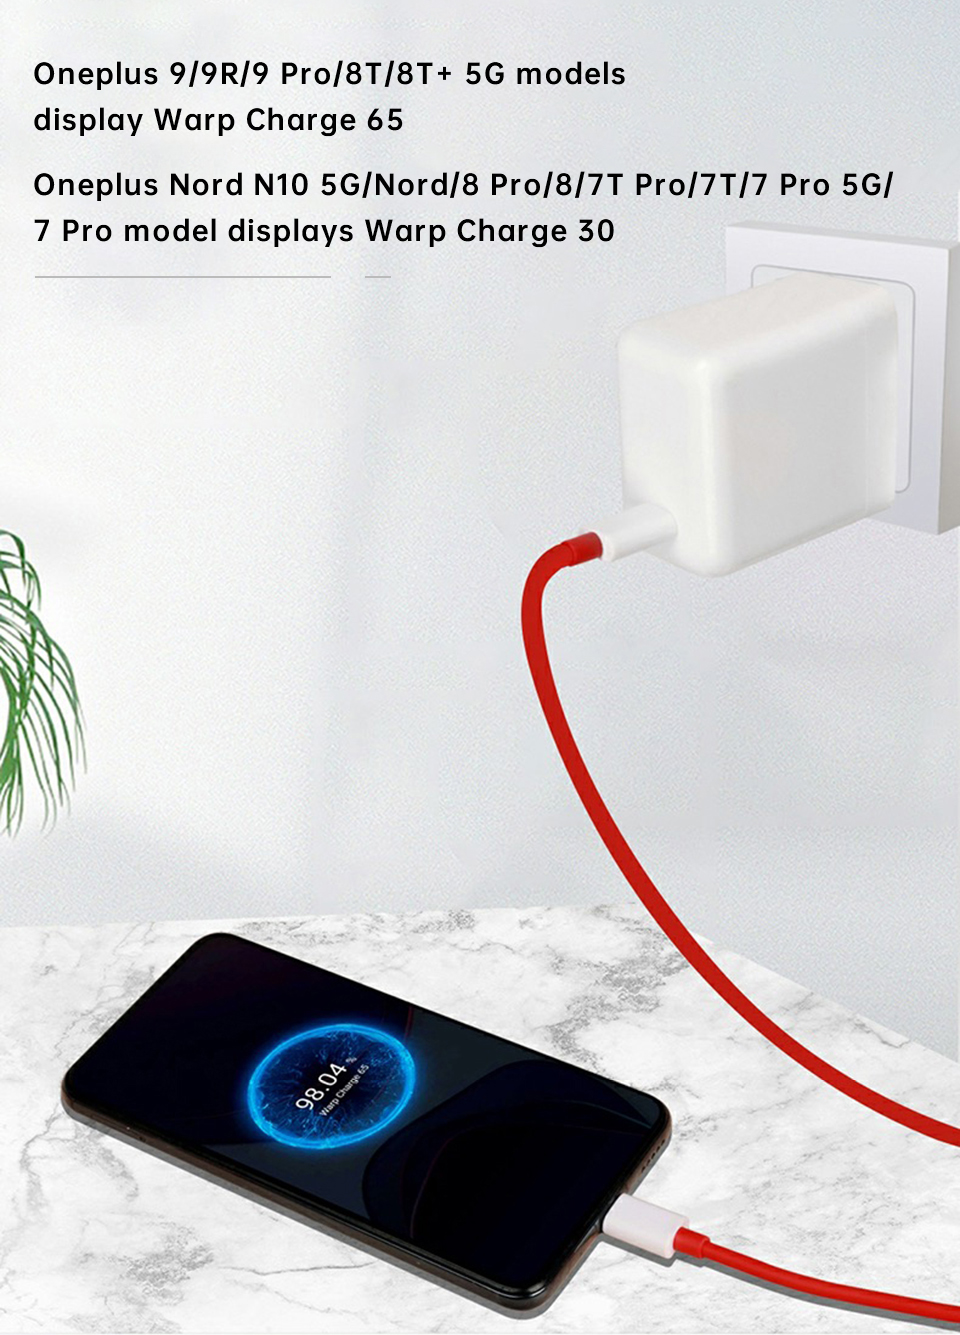 65W-Warp-Charge-USB-C-Charger-Dash-Warp-Fast-Charging-Wall-Charger-Adapter-EU-Plug-With-65W-65A-Max--1877311-4